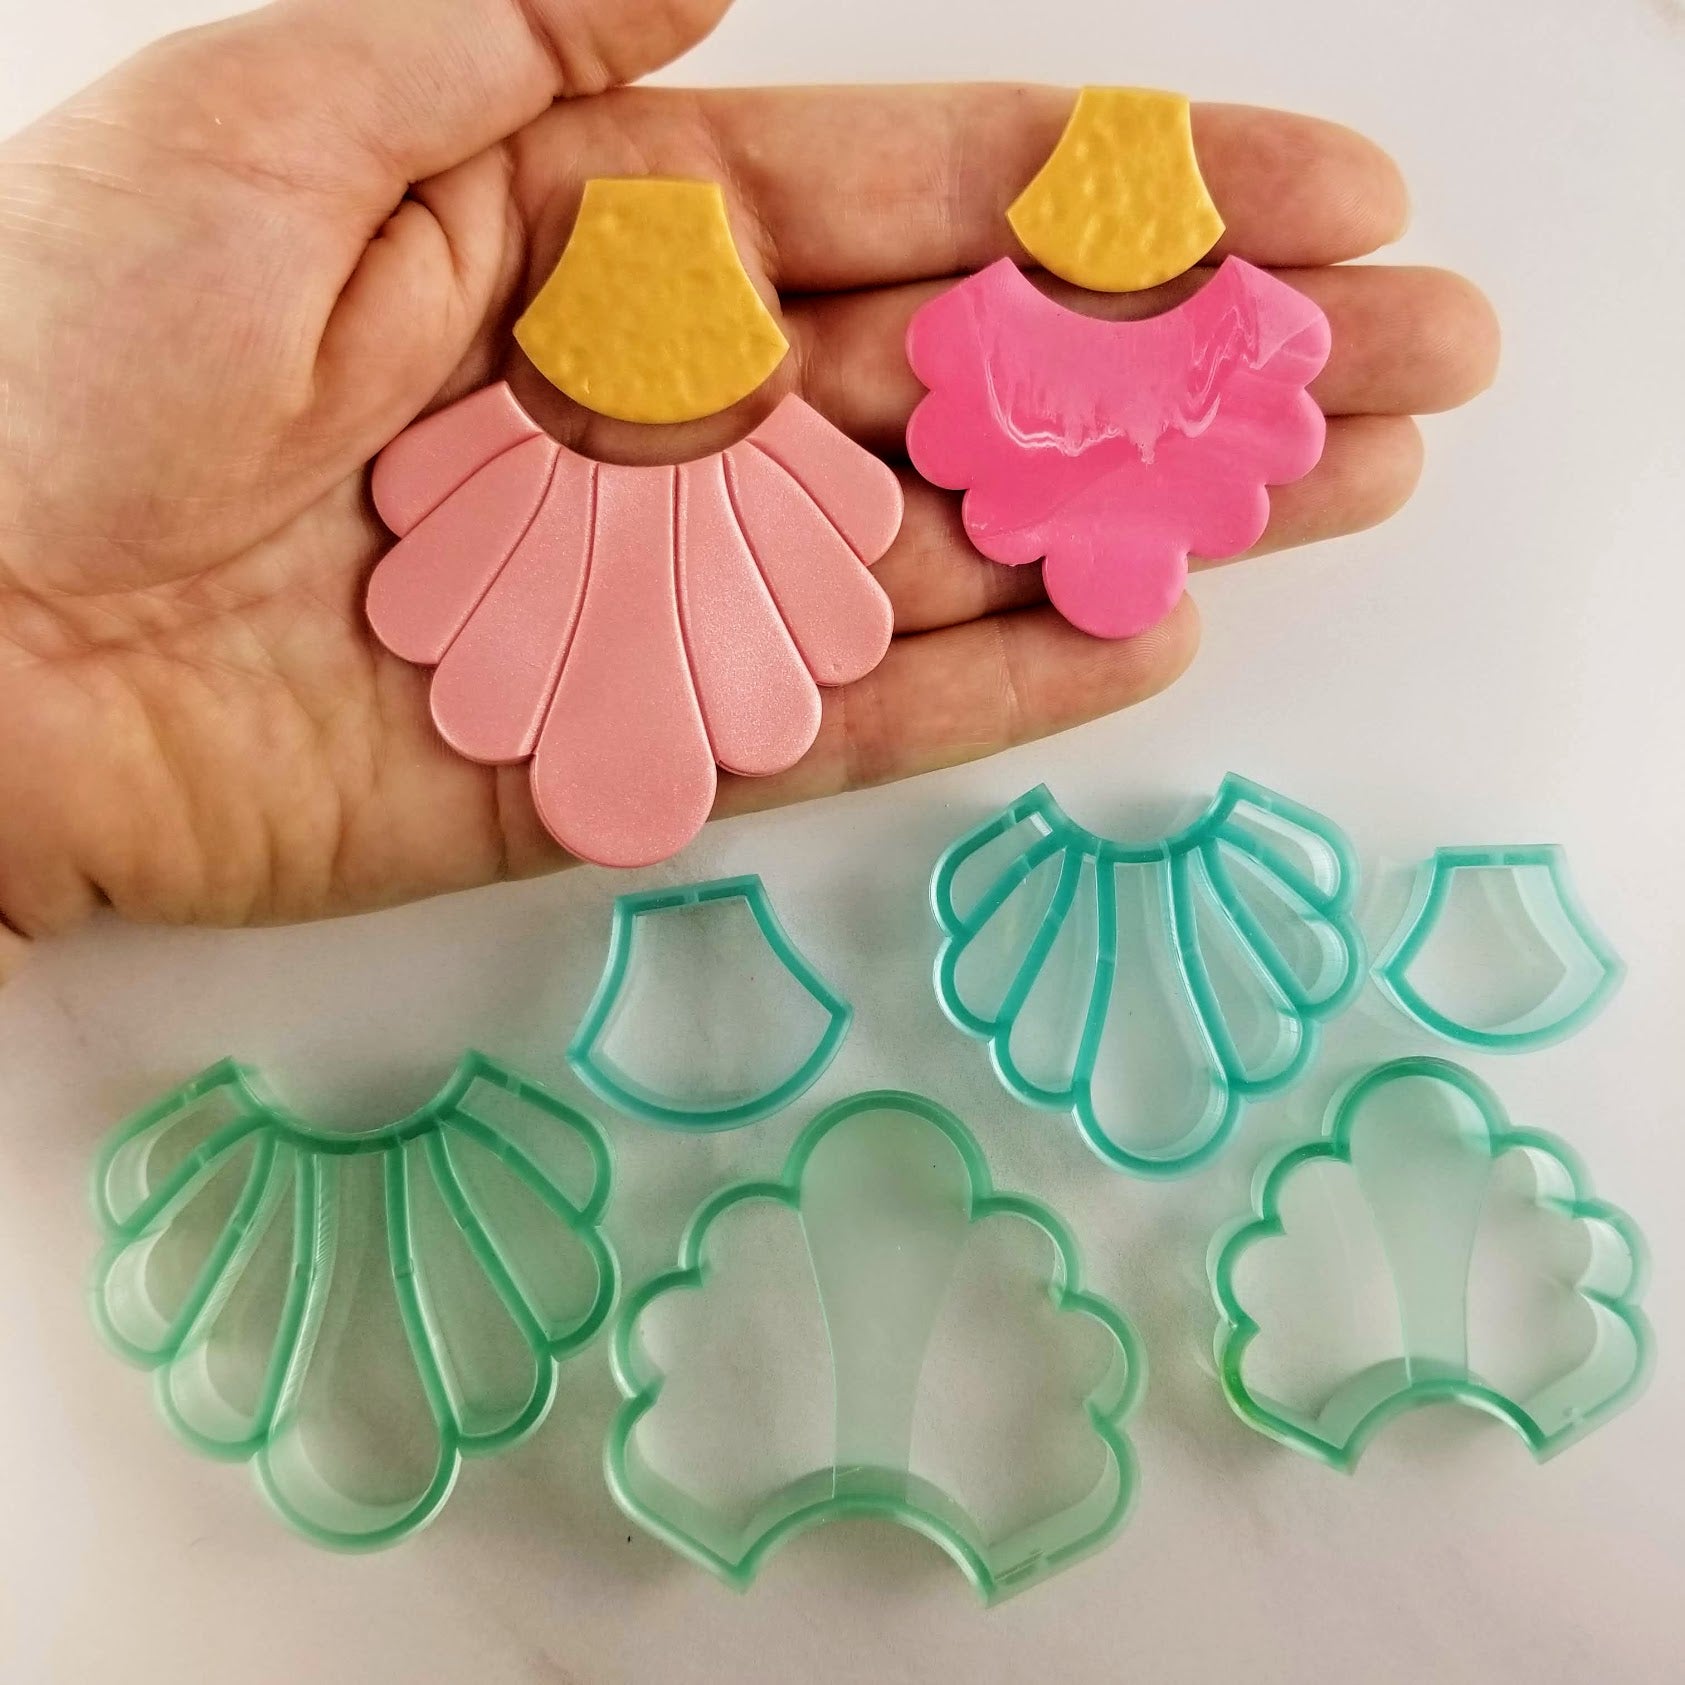 The Art deco flower polymer clay cutter set comes in two styles, debossing and outline cutter. It also comes in different sizes, 5 centimeters and 4 centimeters. Comparison in photo